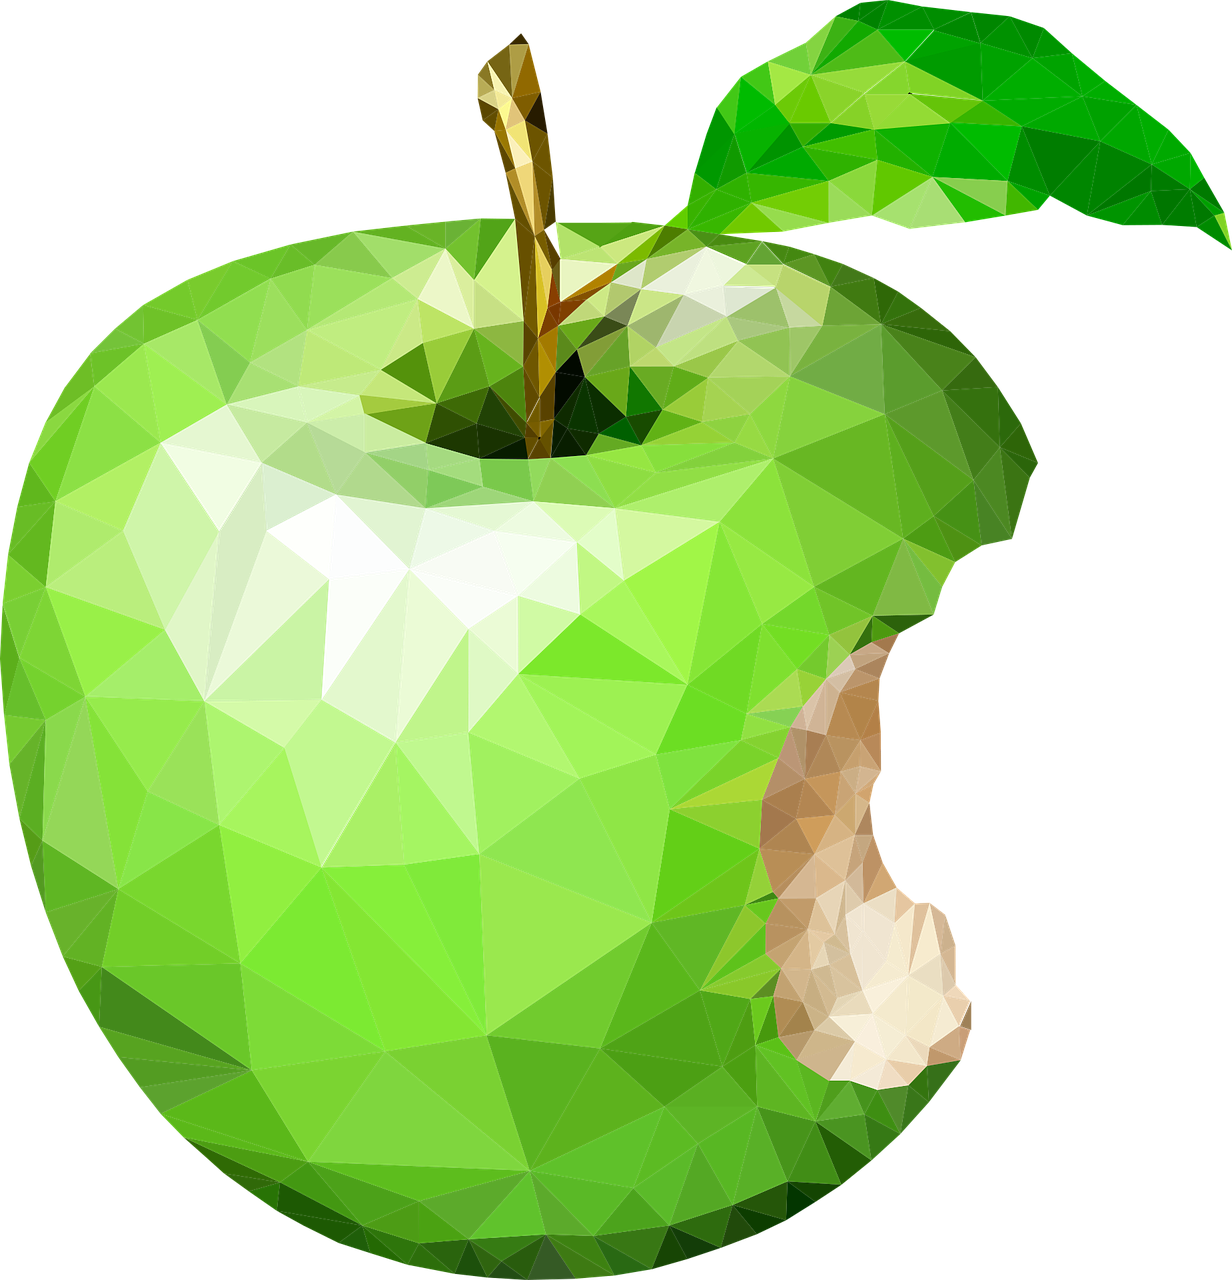 Apple Fruit Apples Green Apple Png Image - Apple Icon (1232x1280)